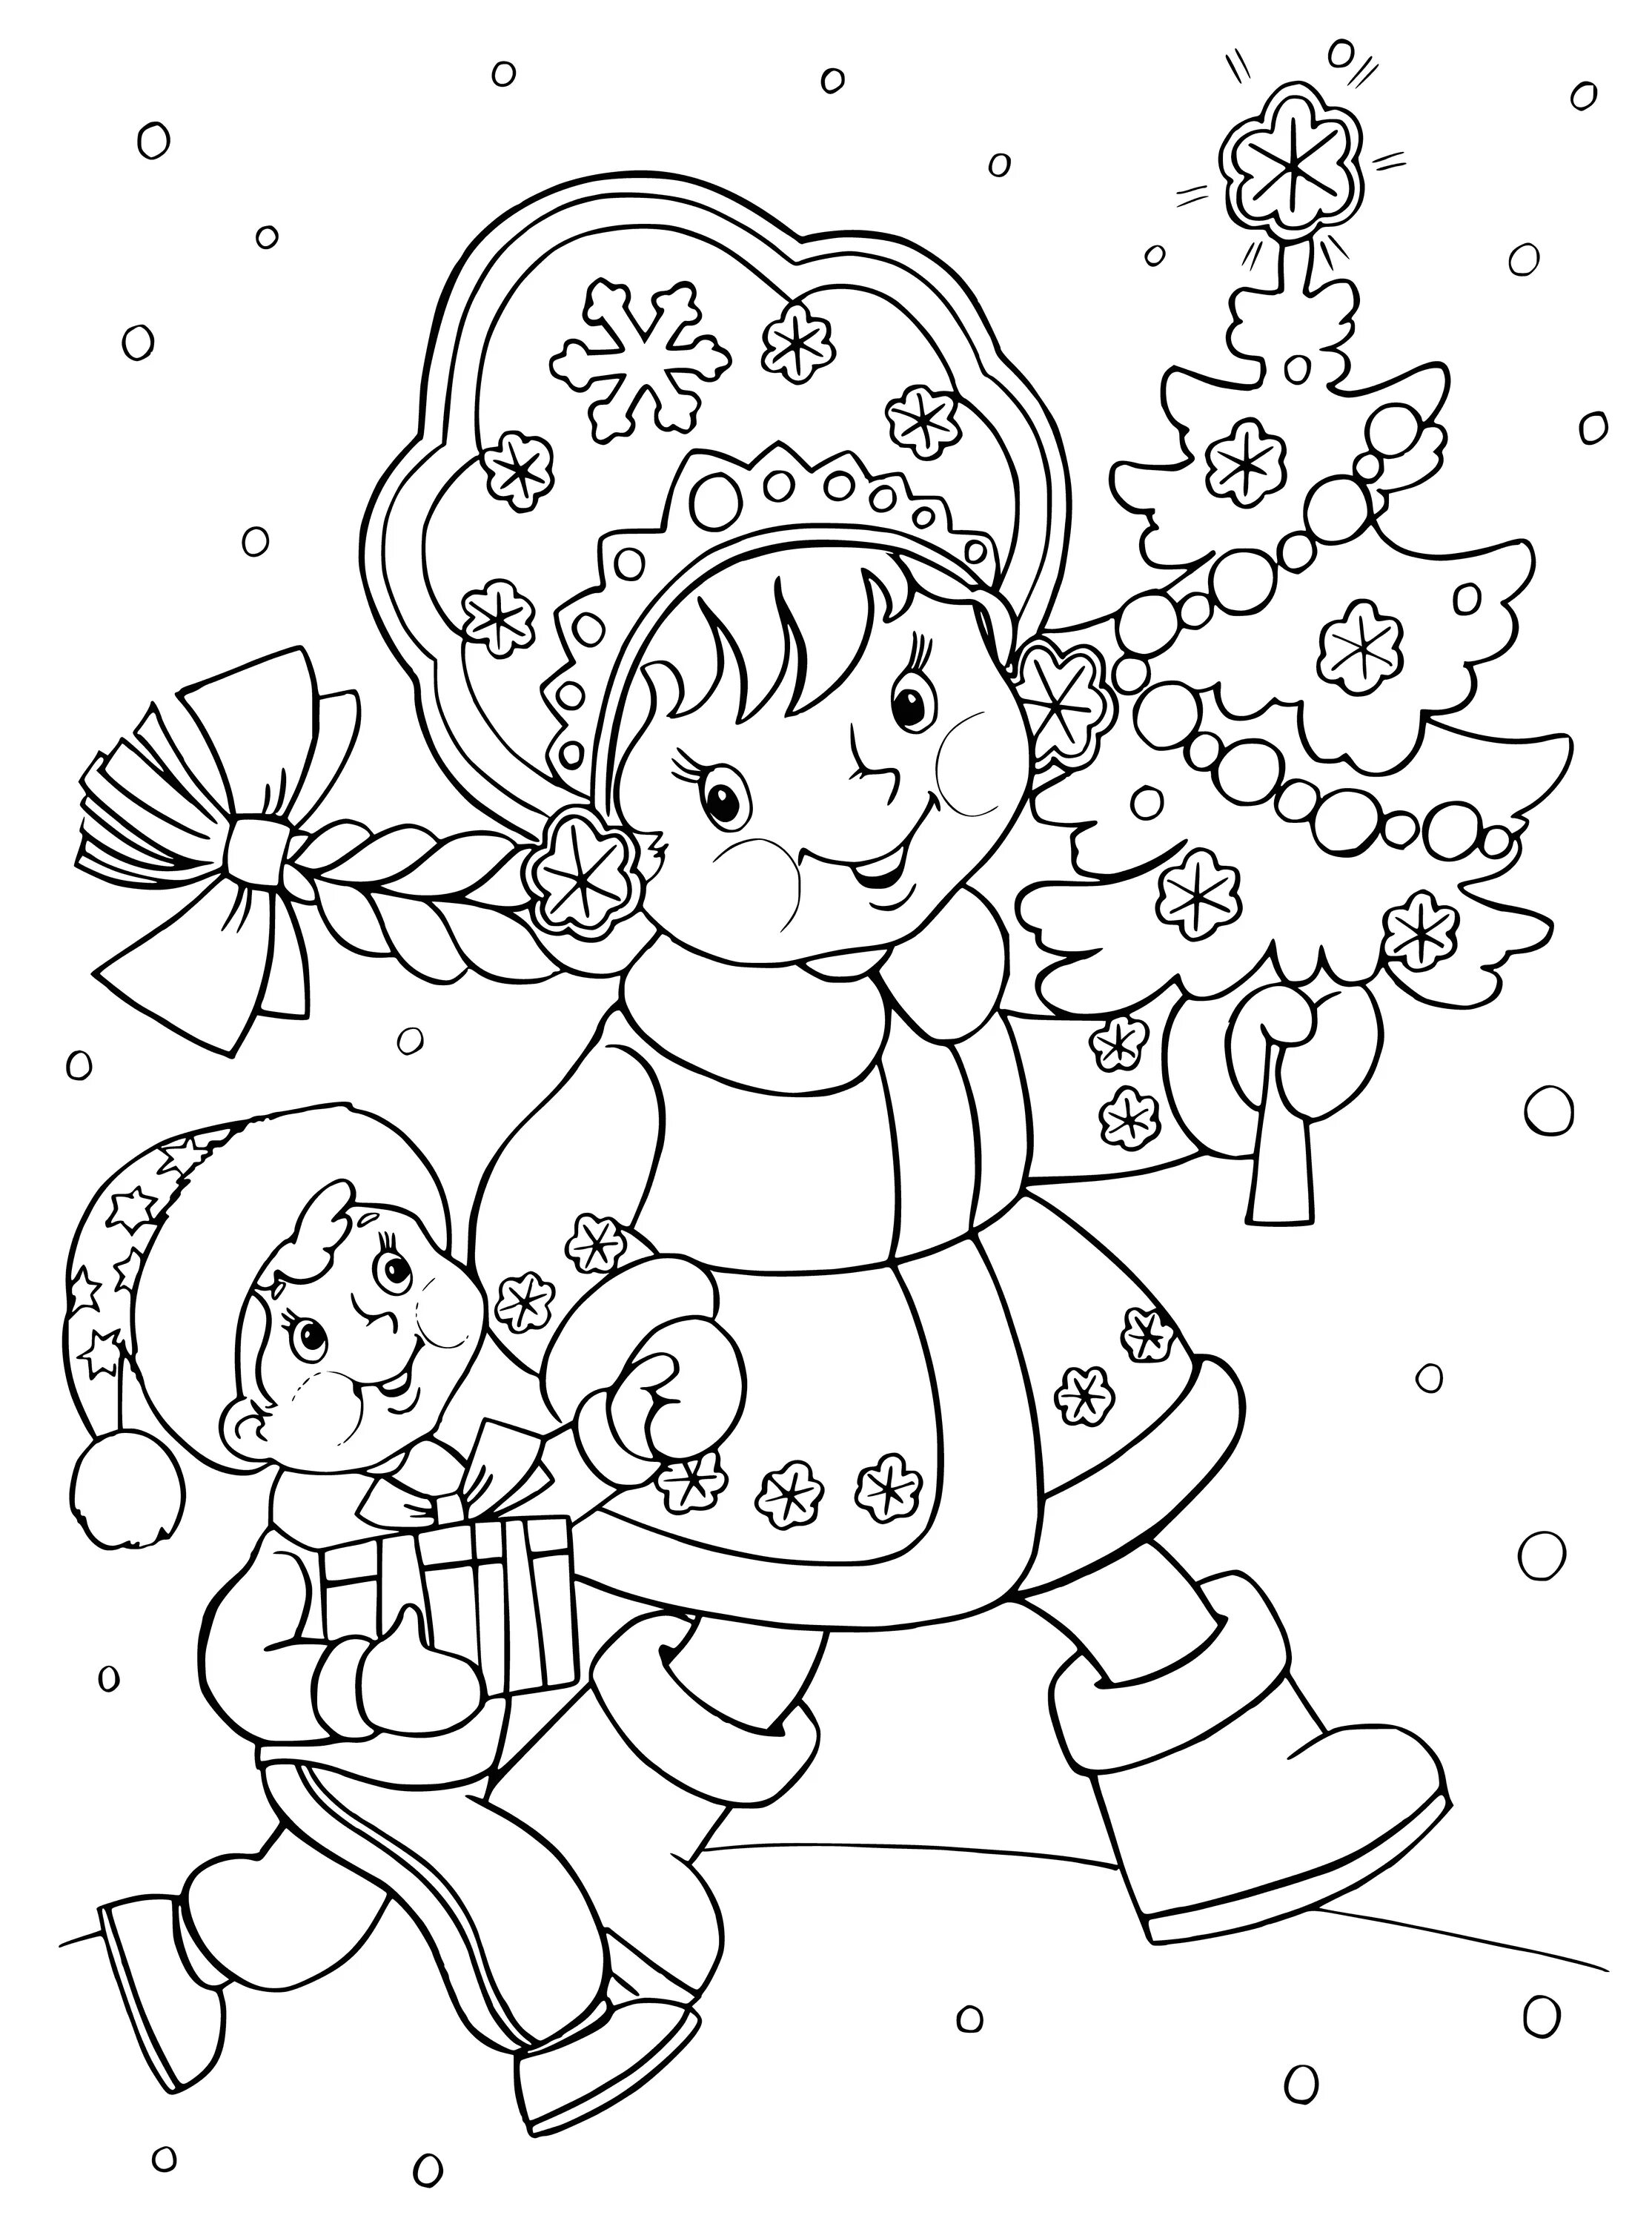 Snow Maiden mystical coloring book for girls